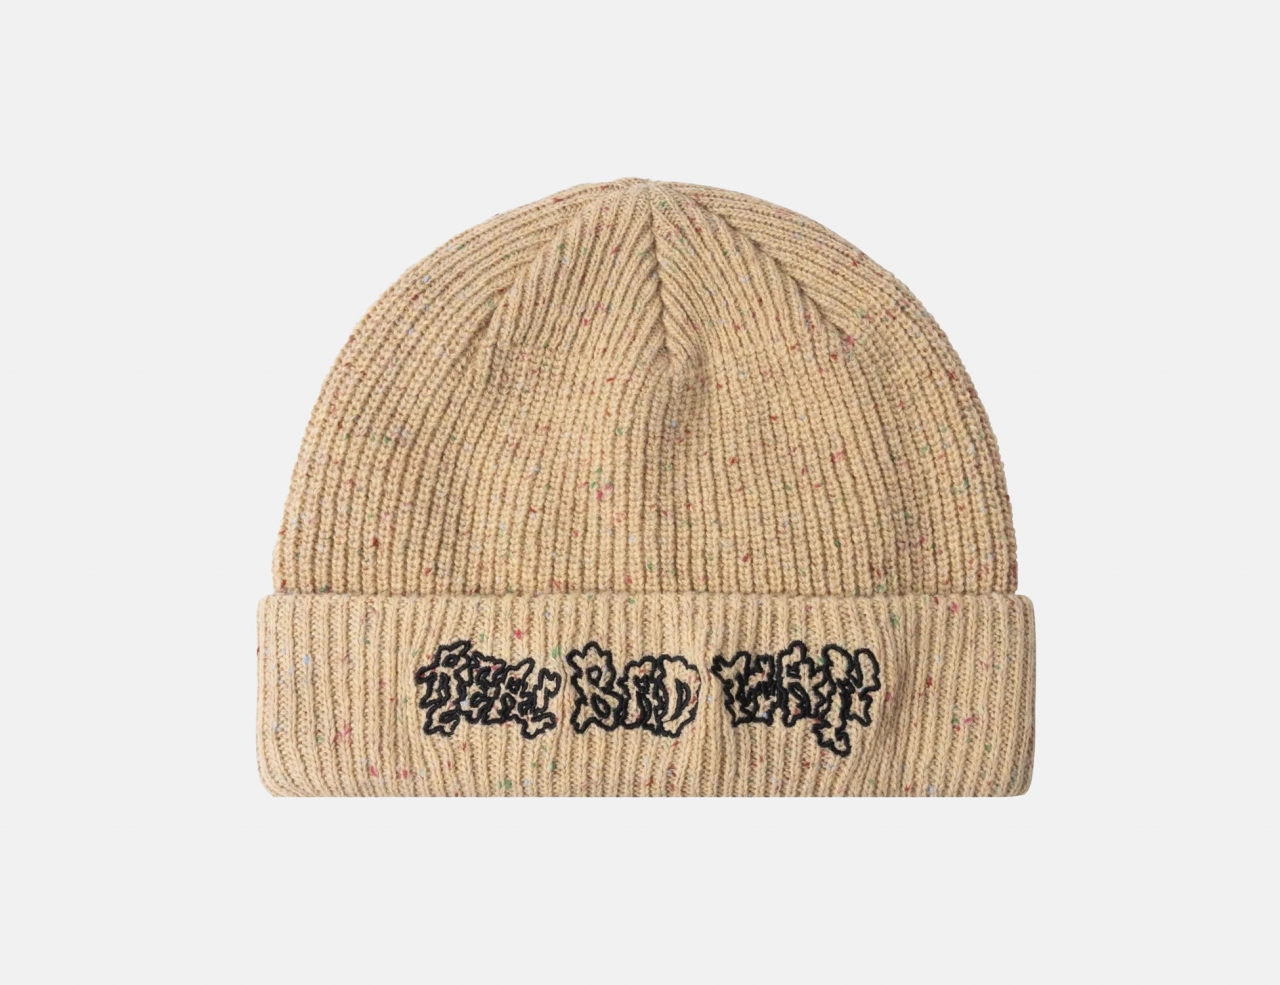 Real Bad Man Wild Record Knit Beanie - Light Brown